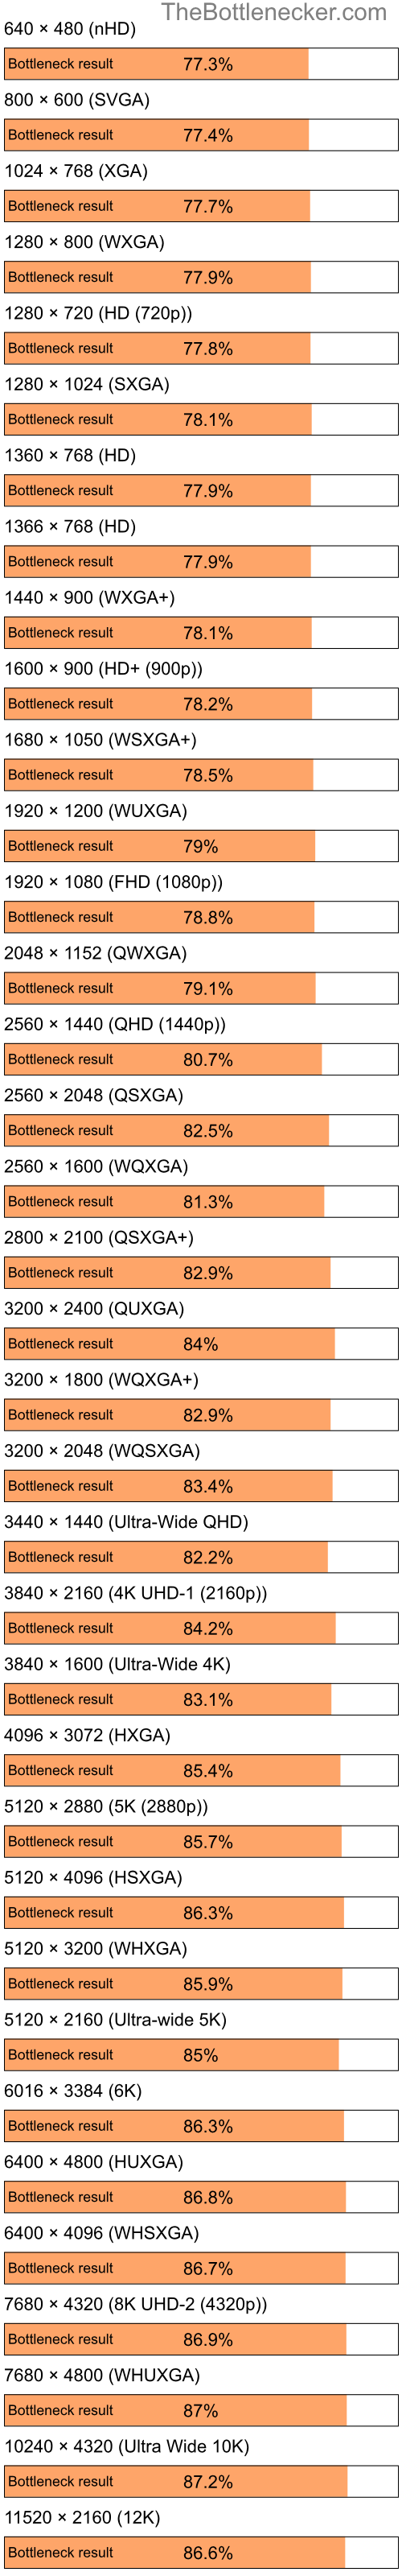 Bottleneck results by resolution for Intel Pentium 4 and NVIDIA GeForce Go 6150 in Processor Intense Tasks